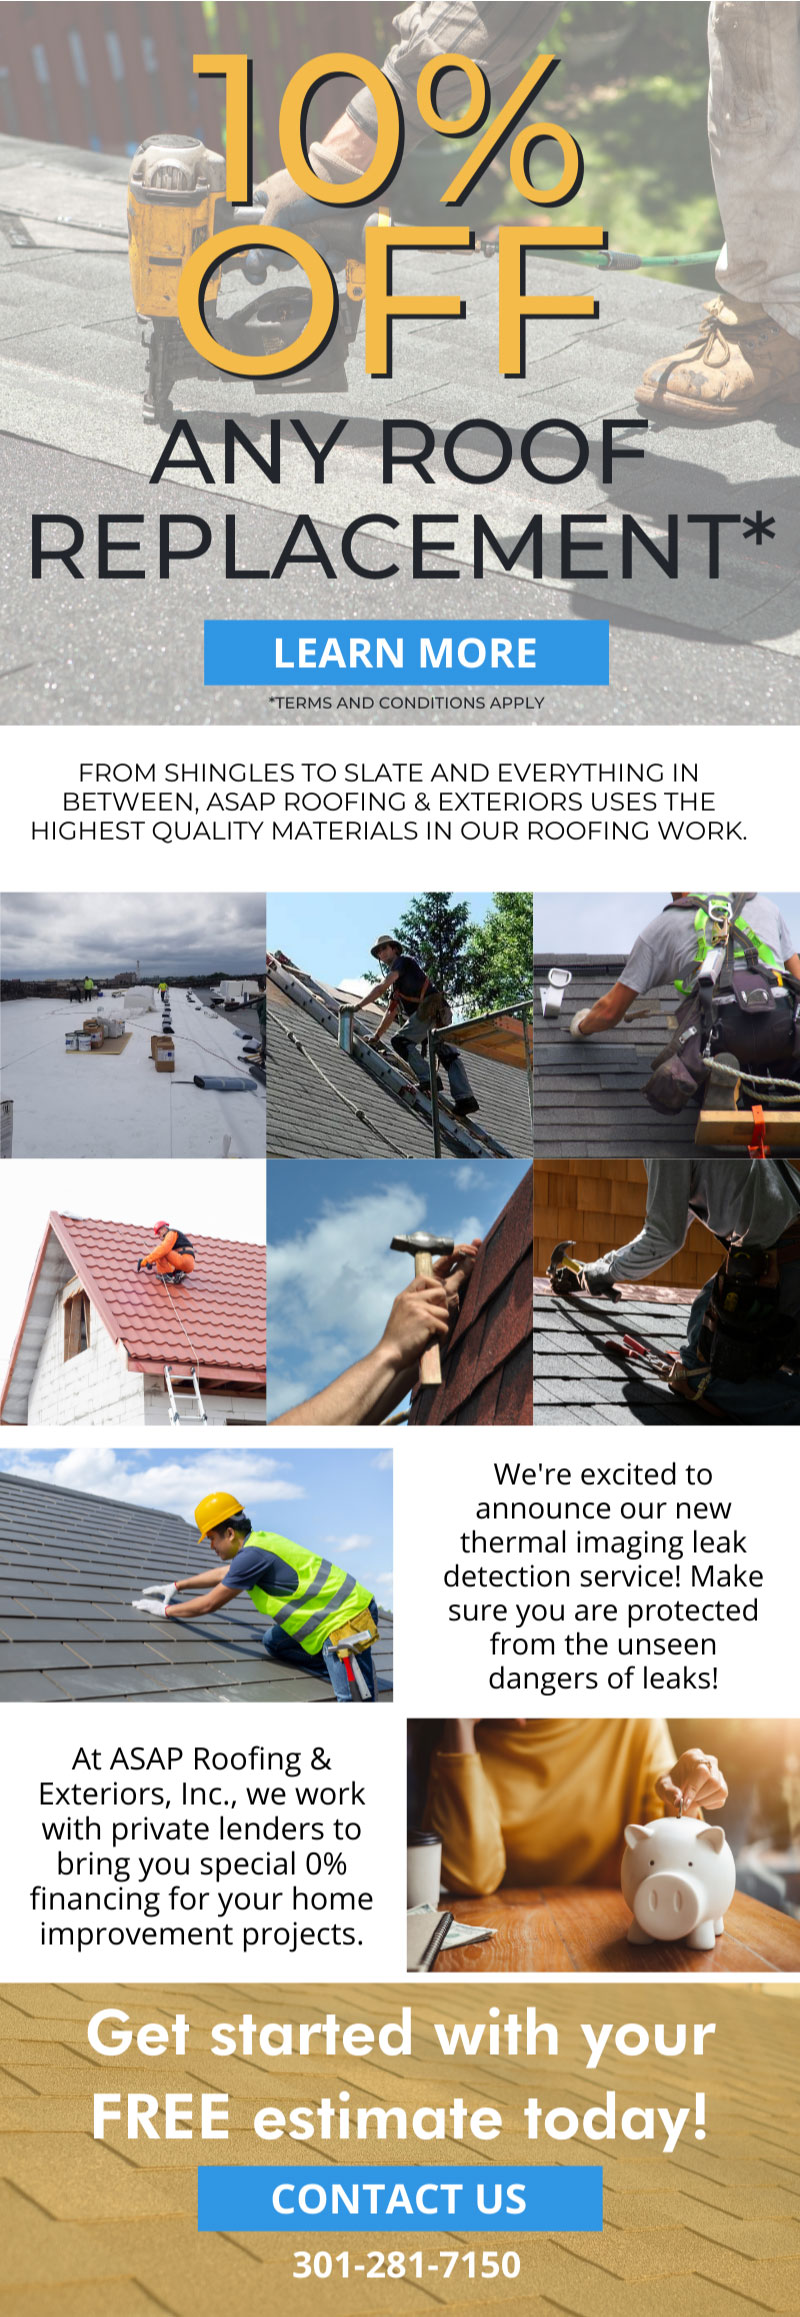 10% Off Any Roof Replacement Infographic